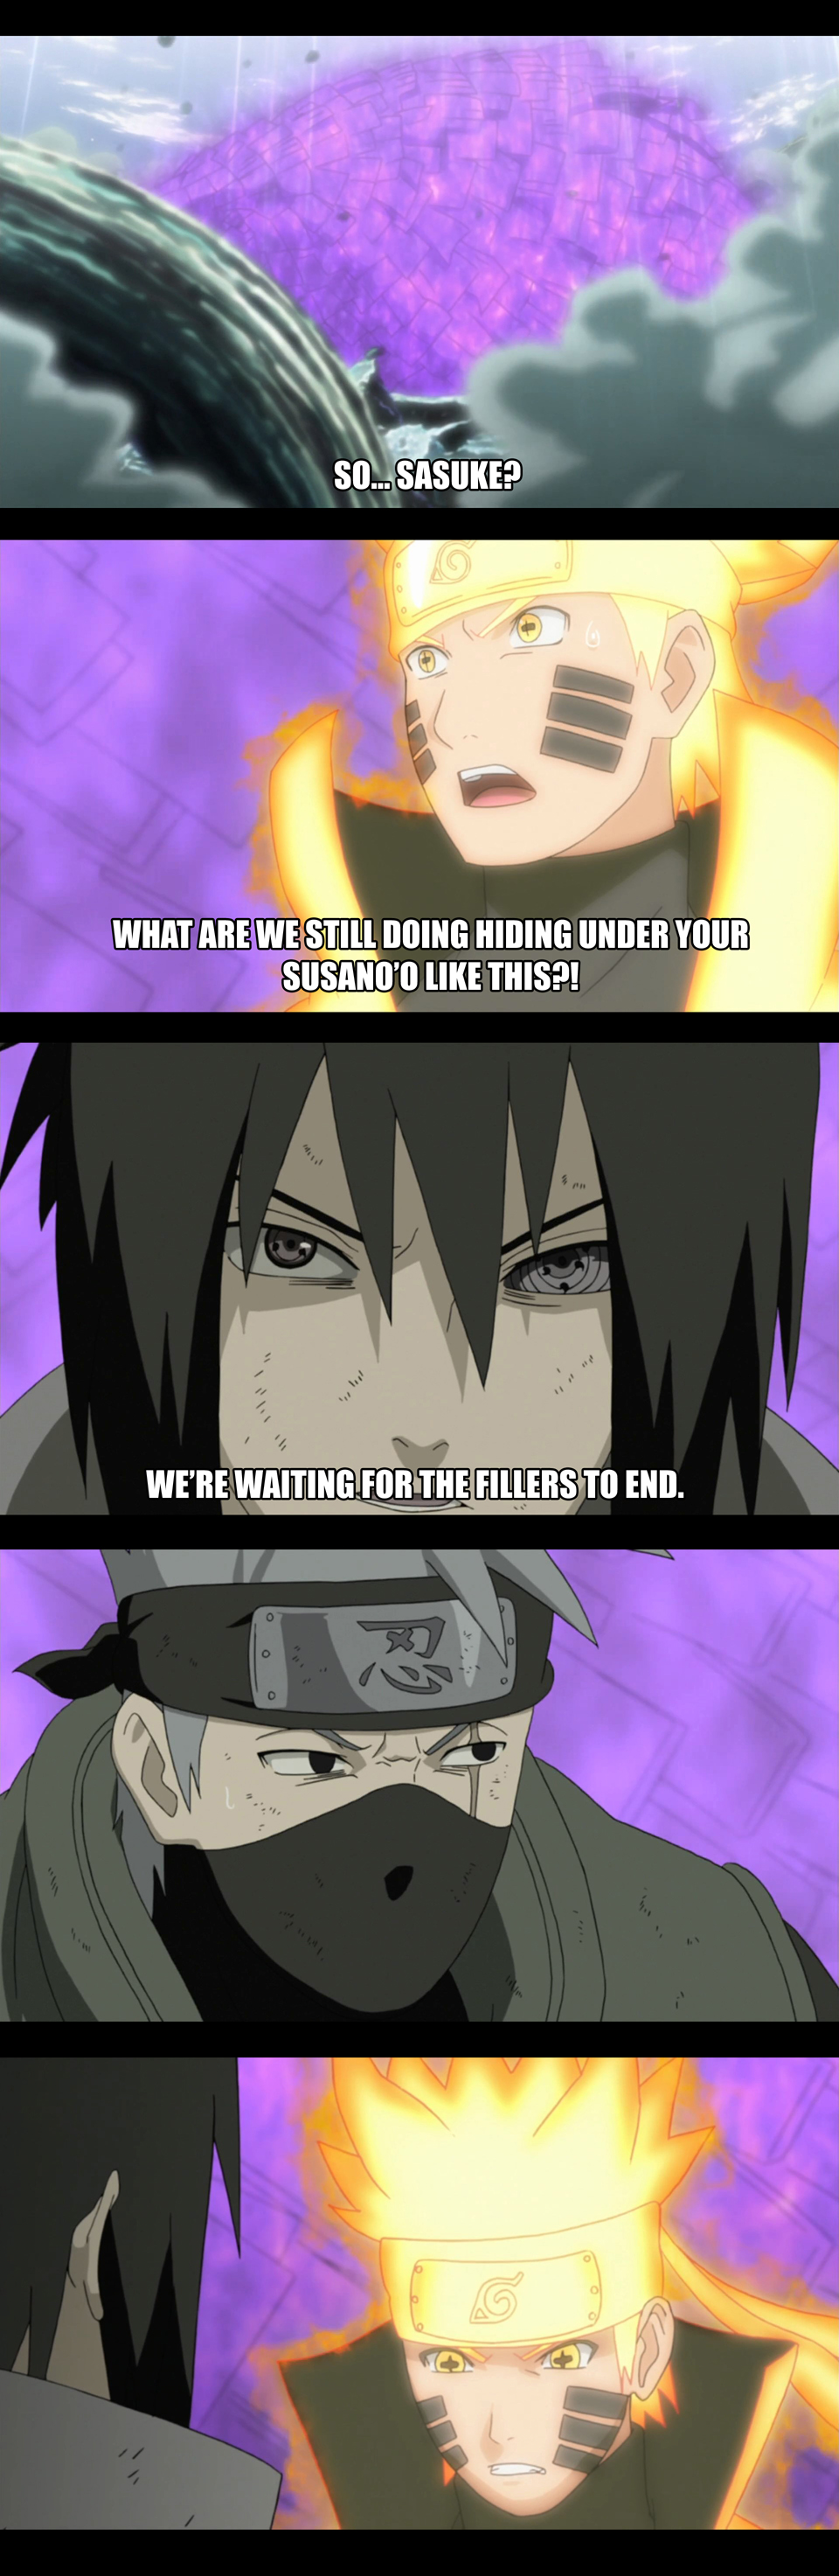 How To Watch Naruto Shippuden And SKIP Filler